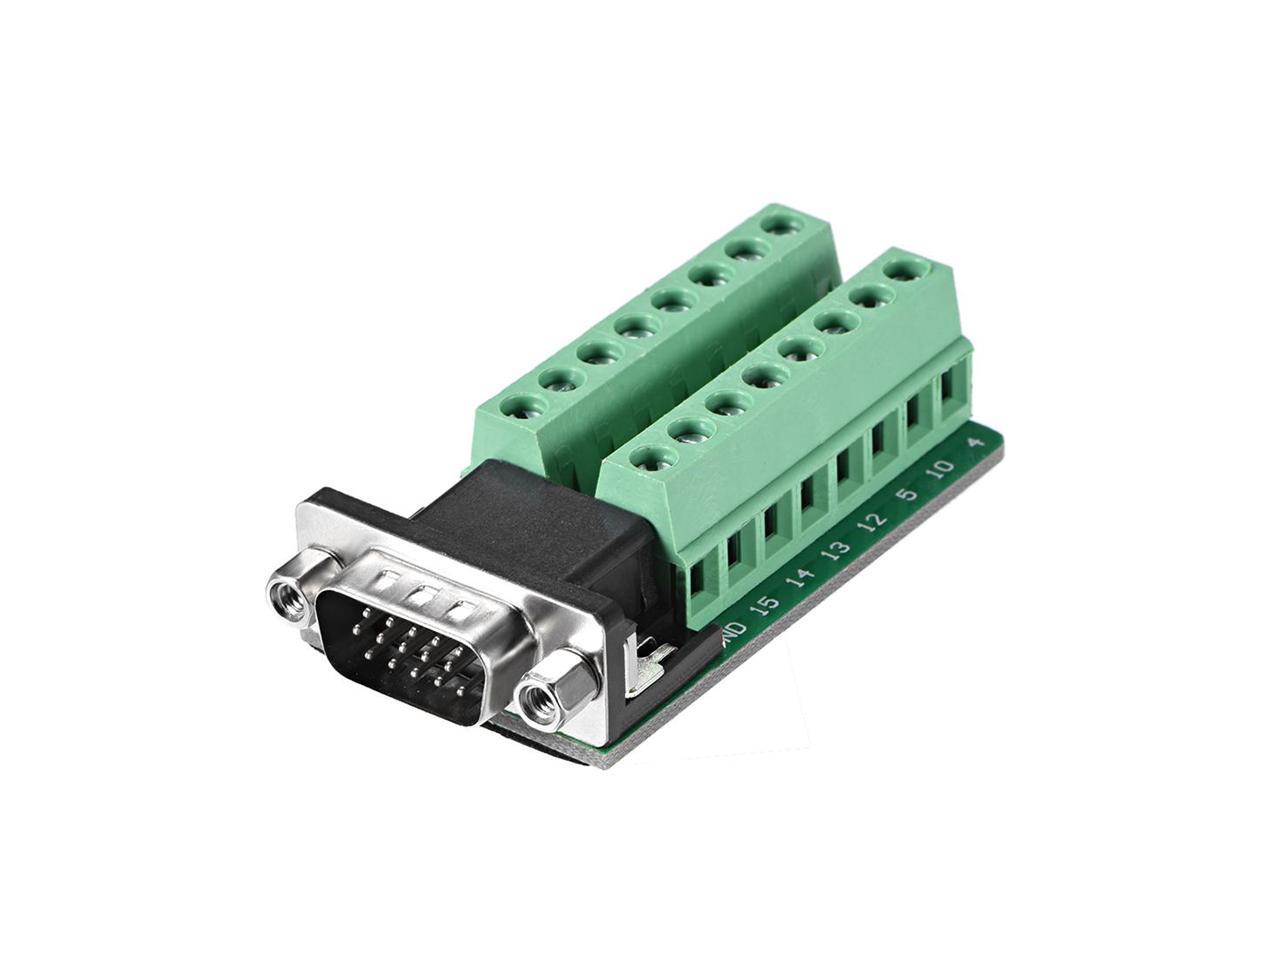 D7 DB15 DSUB 15-pin Male Adapter RS-232 Breakout Board Connector 